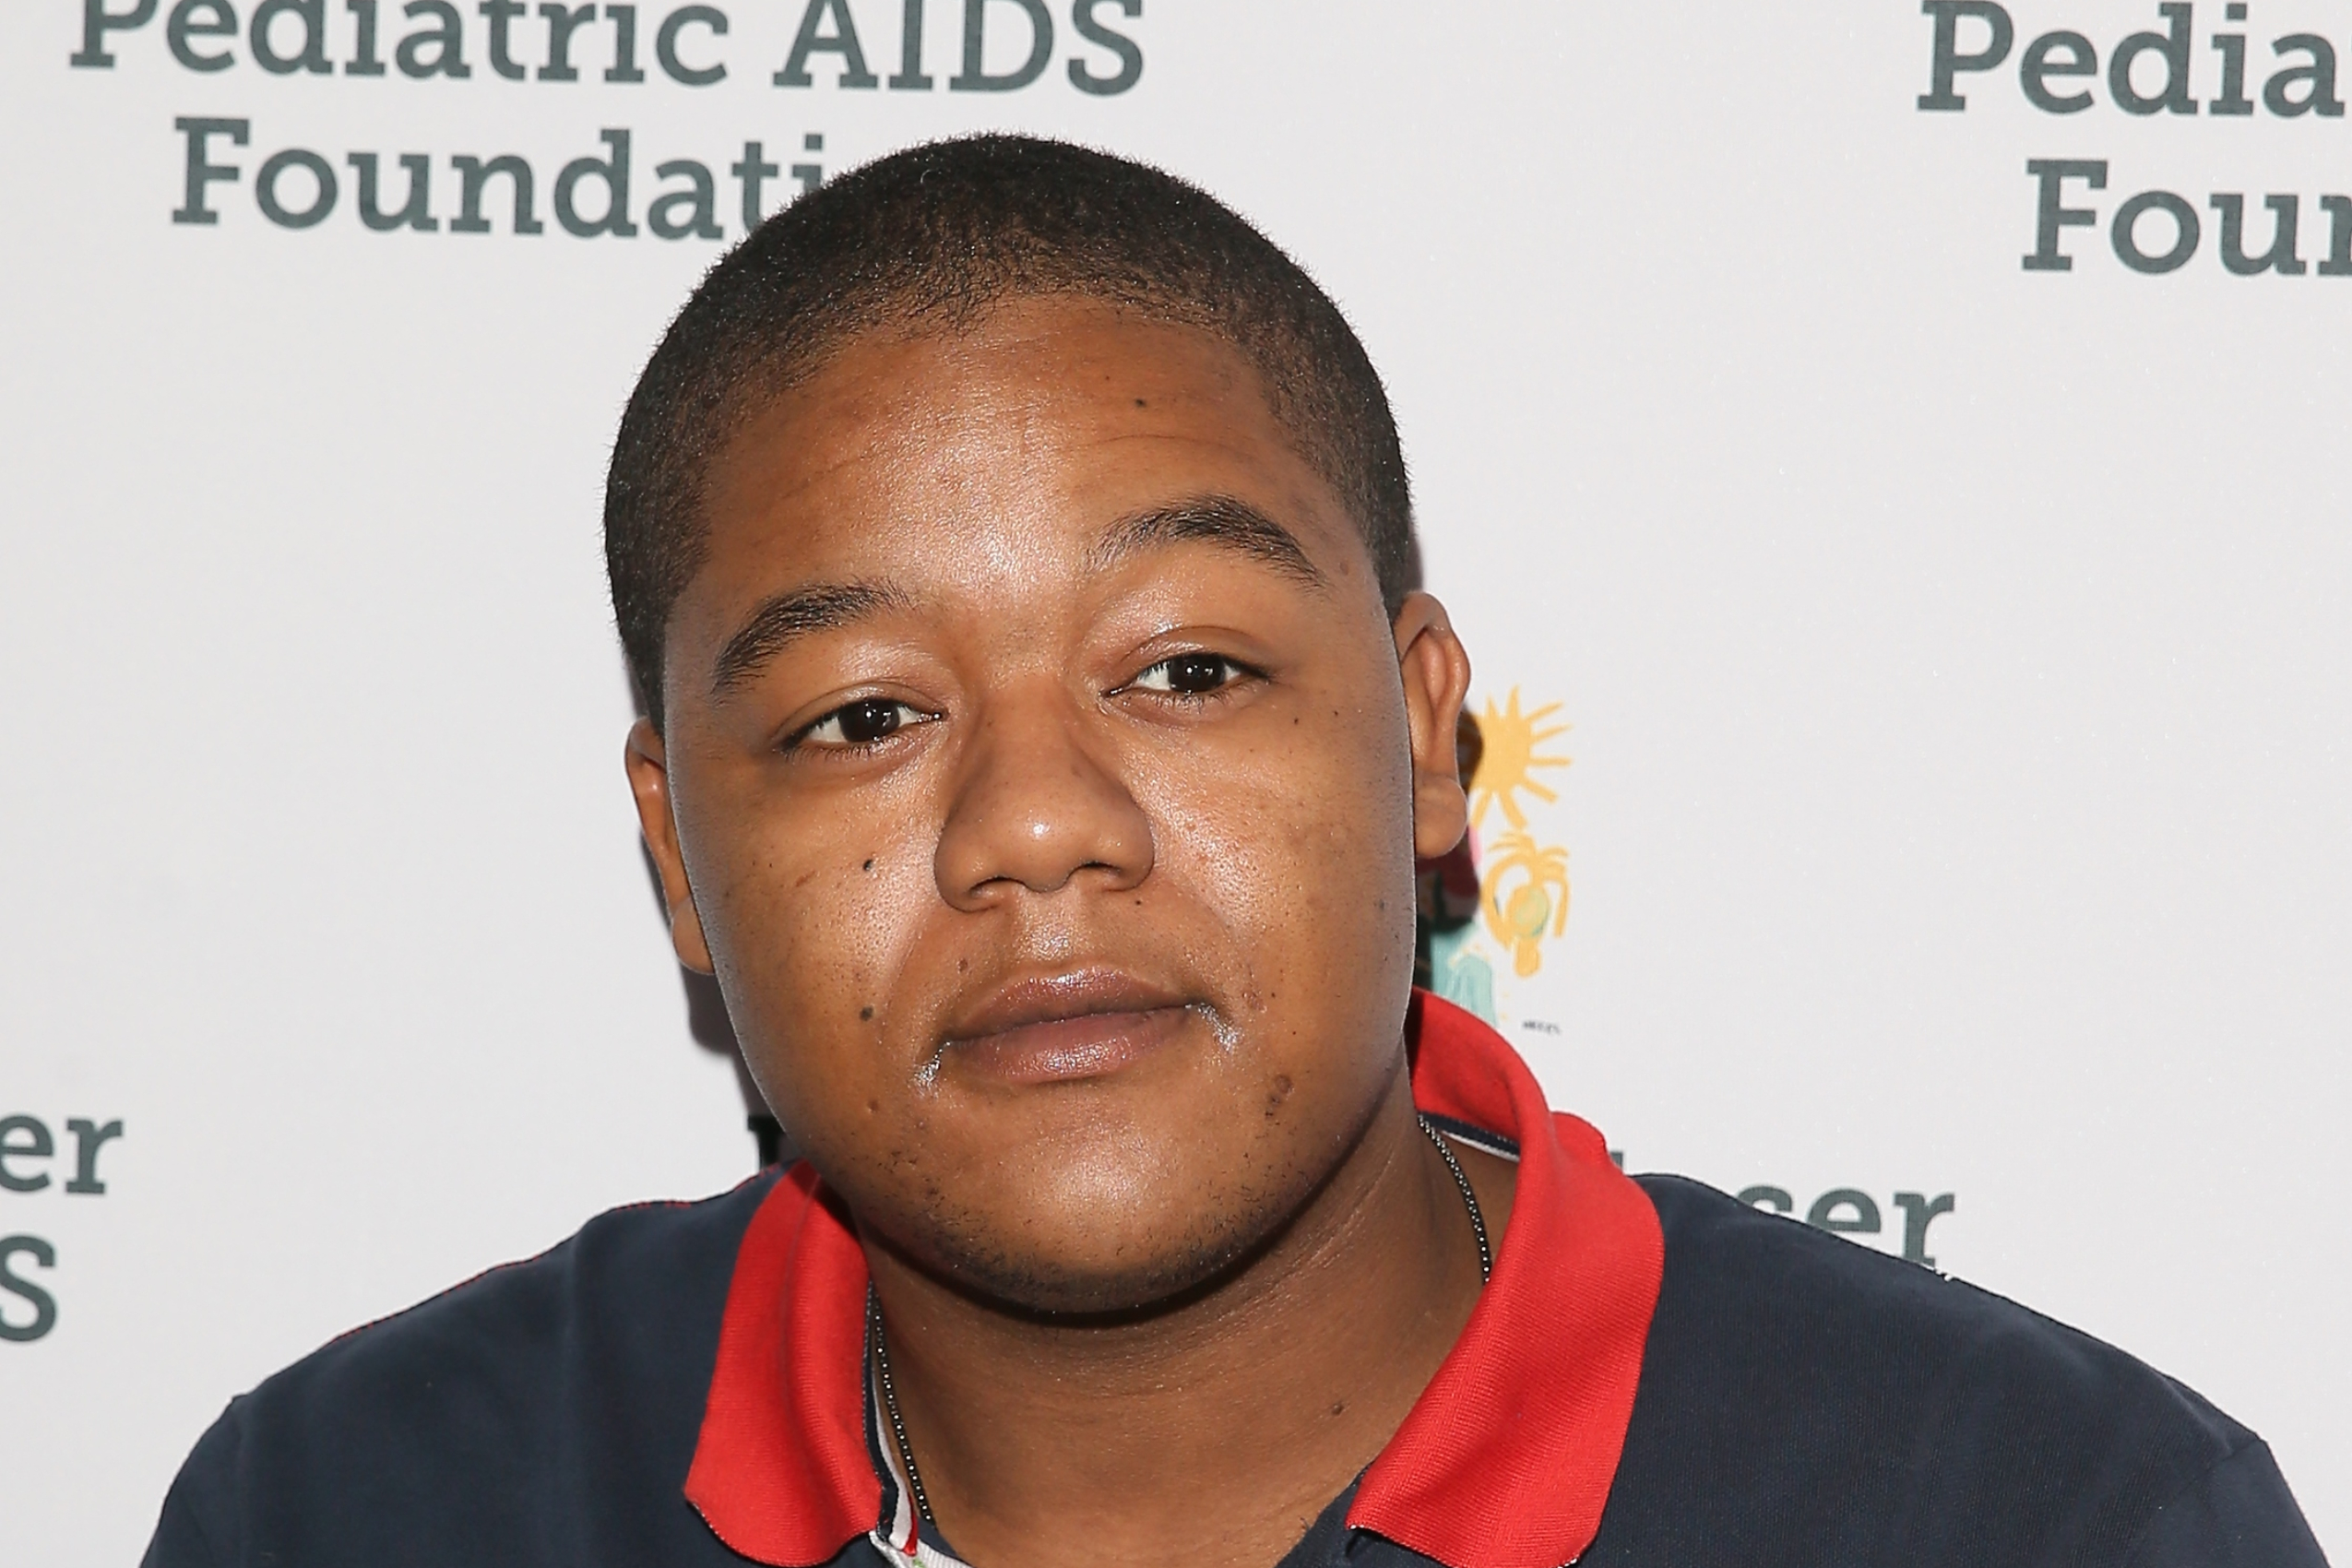 Ex-Disney Star Kyle Massey Has Been Charged For Allegedly Sending Explicit Photos To A 13Y.O.